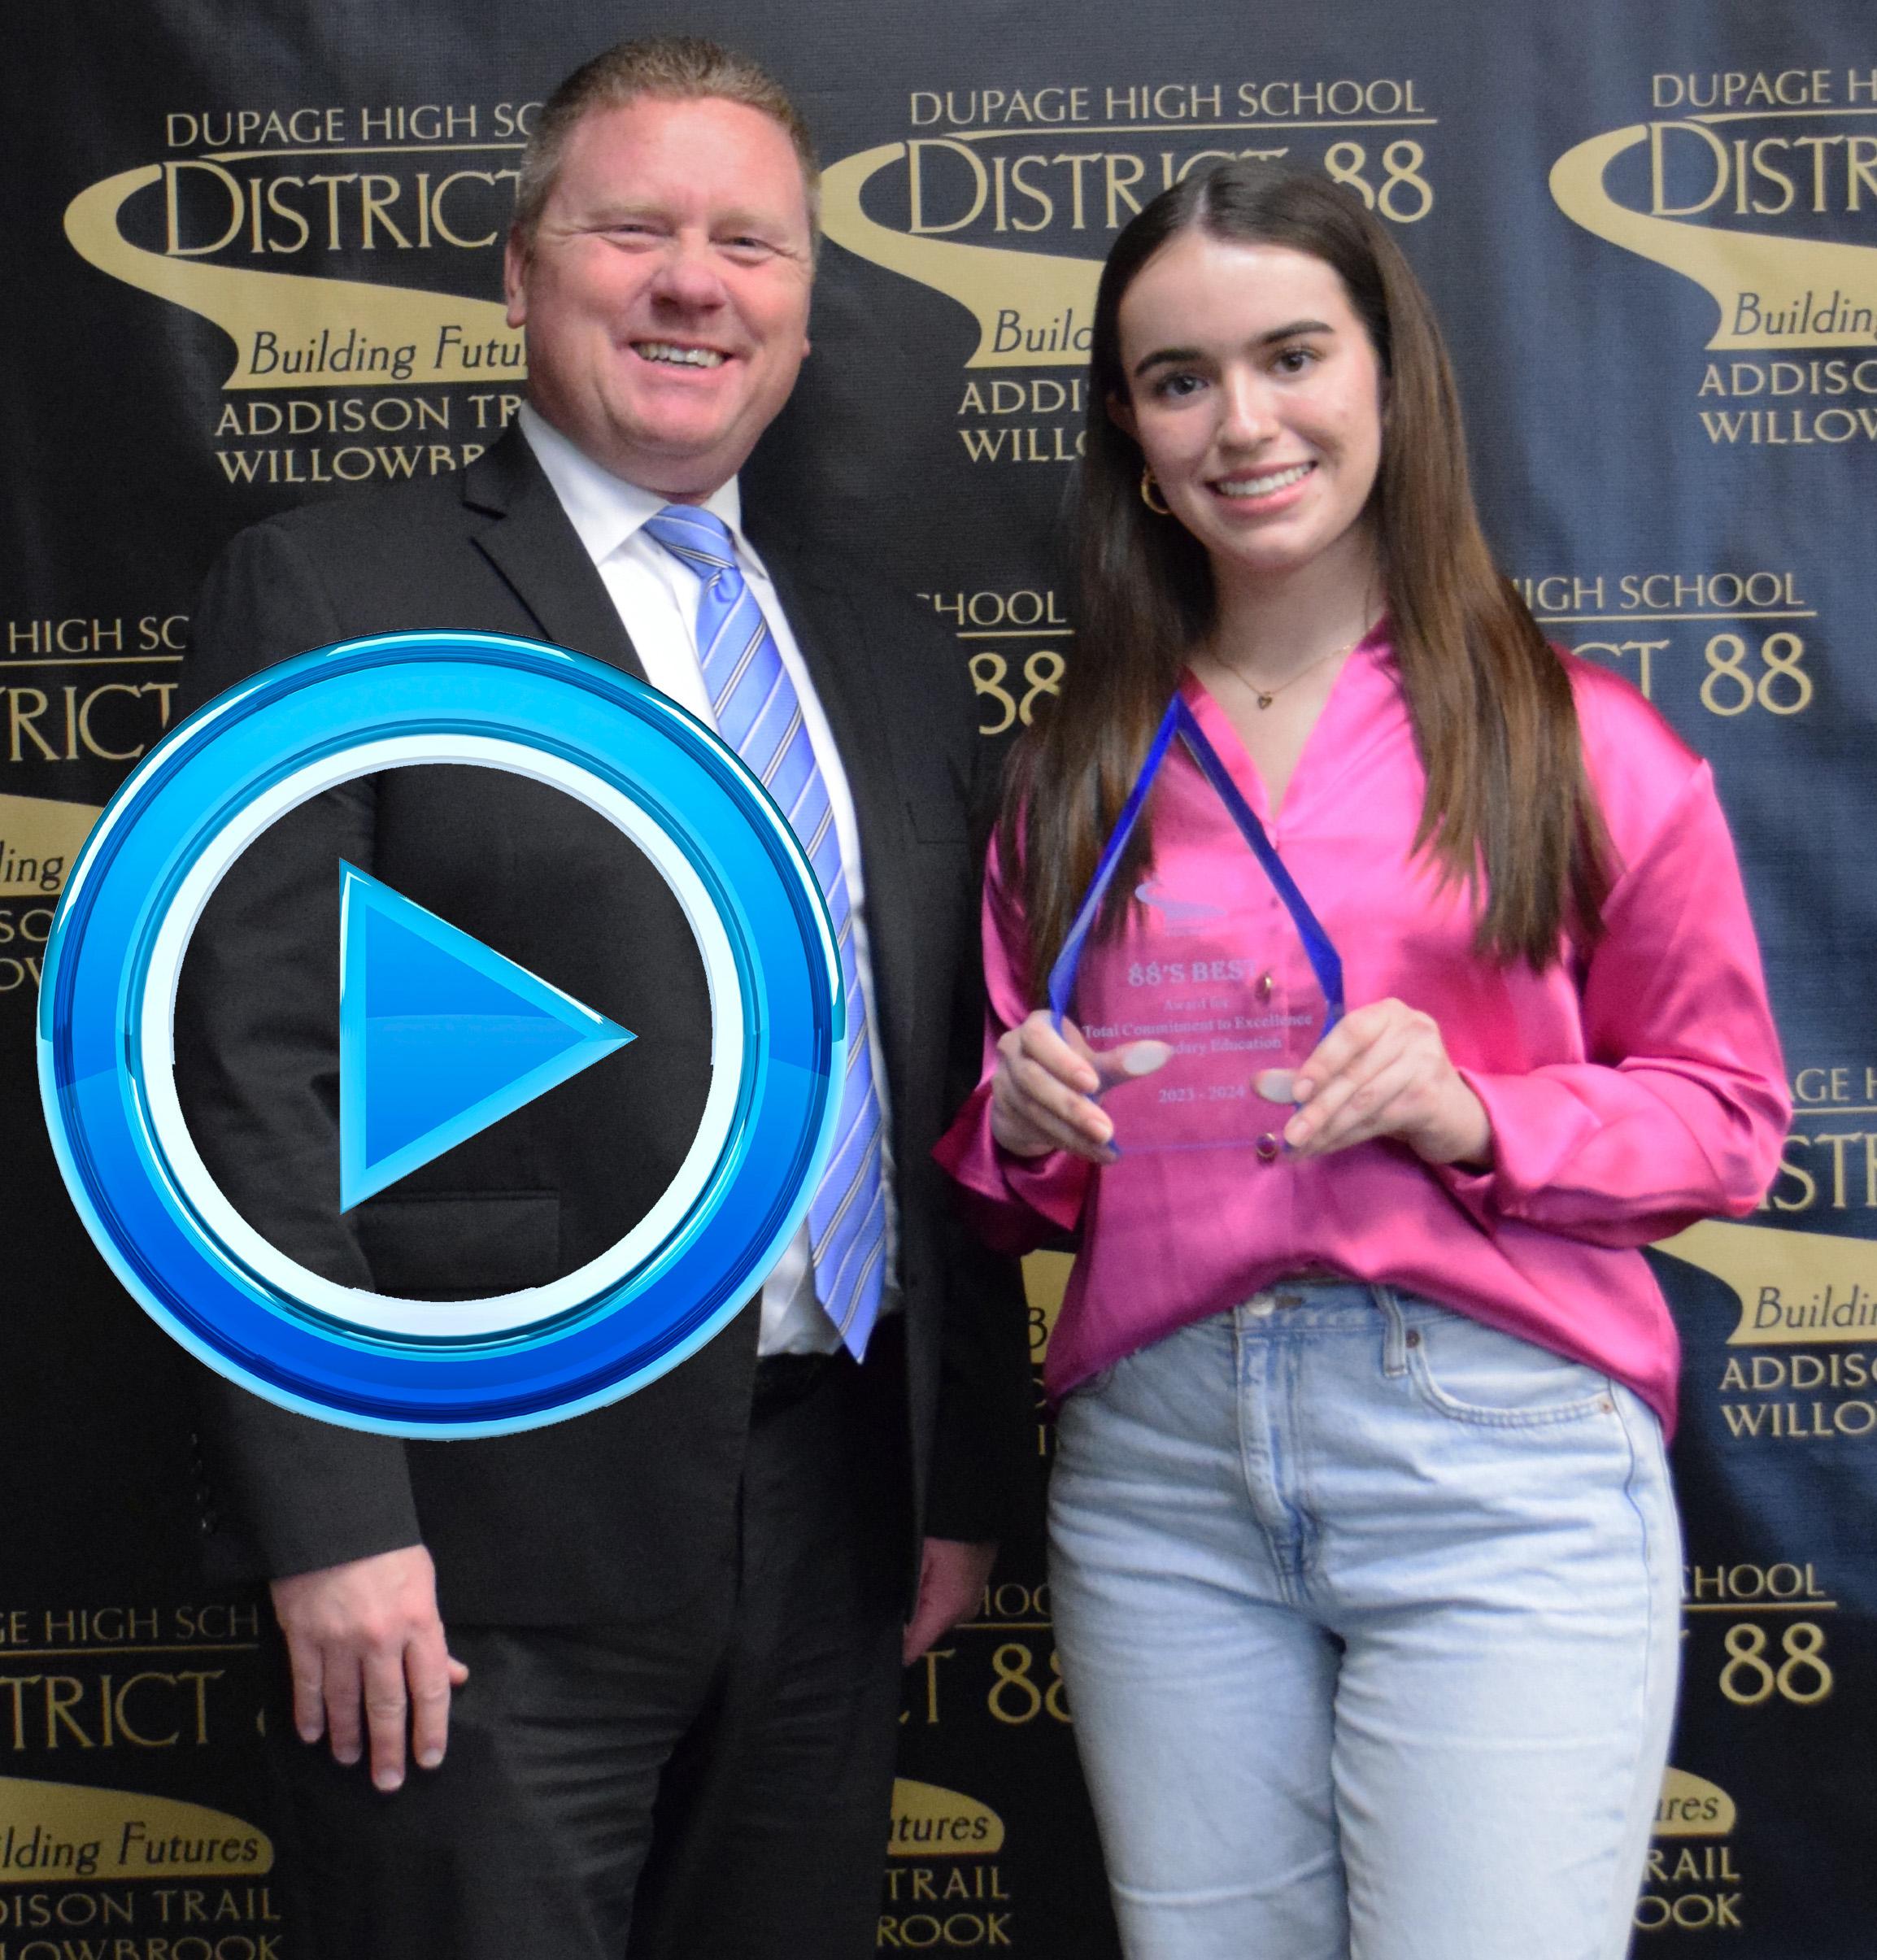 Willowbrook names February recipient of 88’s Best recognition